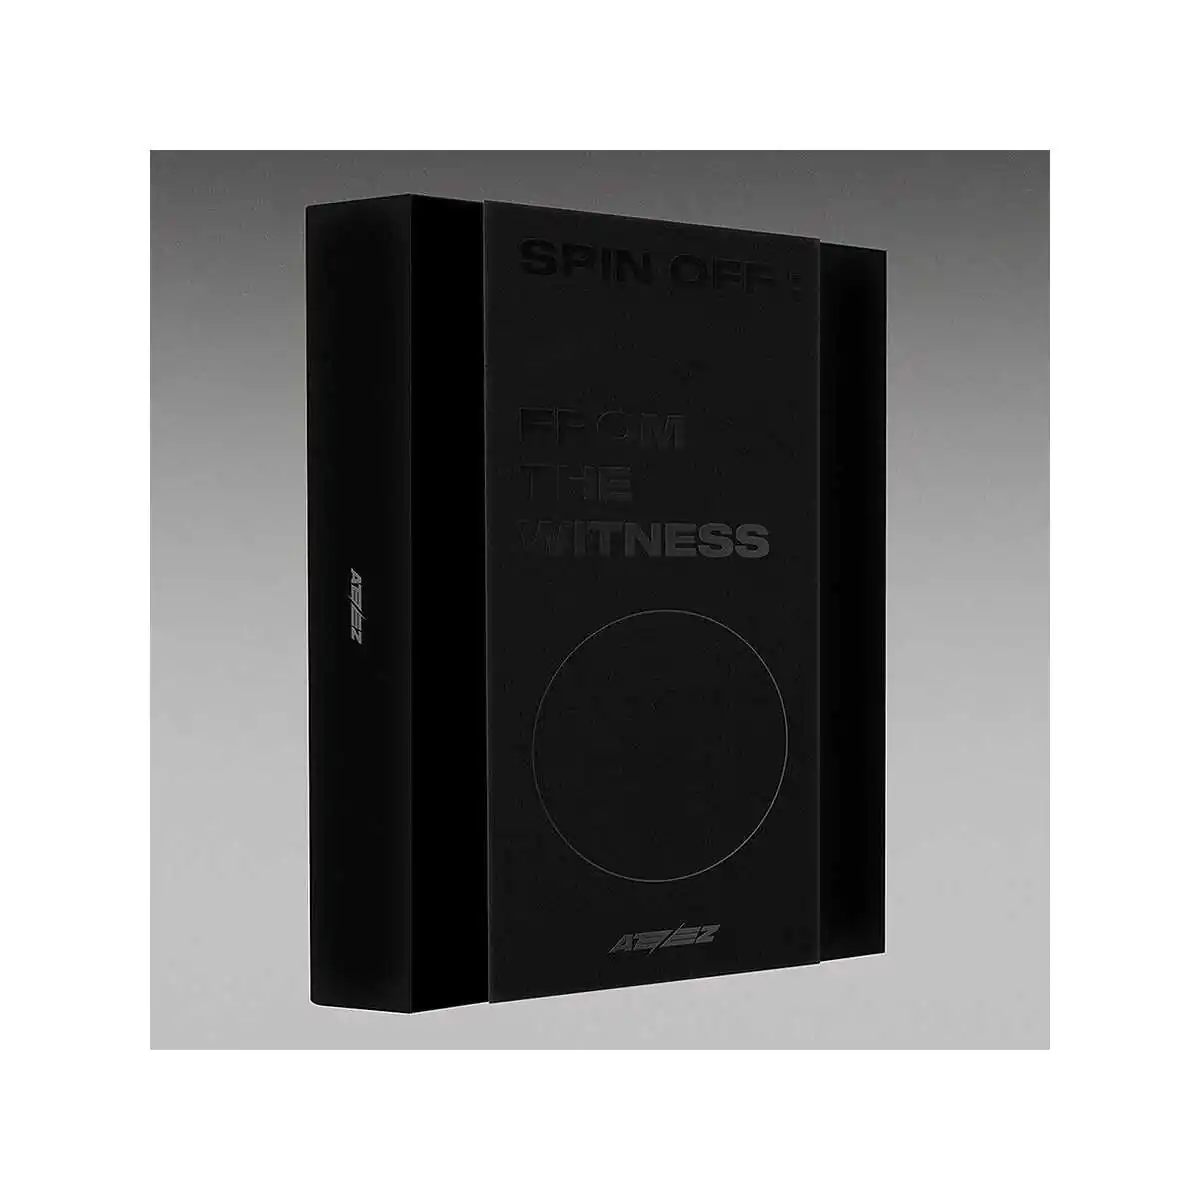 ATEEZ - SPIN OFF : FROM THE WITNESS (WITNESS VER.) (LIMITED EDITION) 